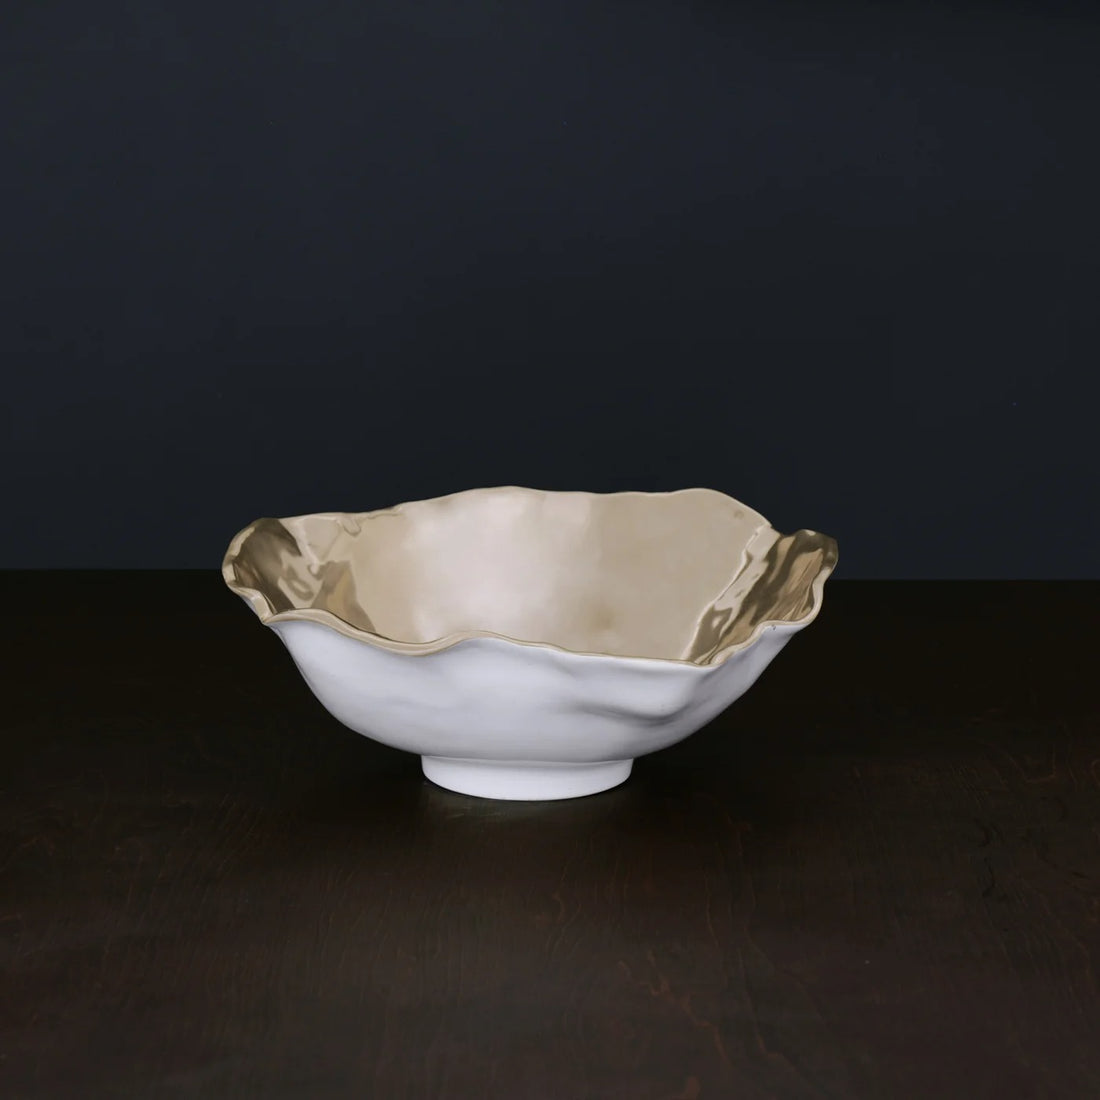 THANNI Maia Large Bowl (White and Gold) SECONDS - NON REFUNDABLE